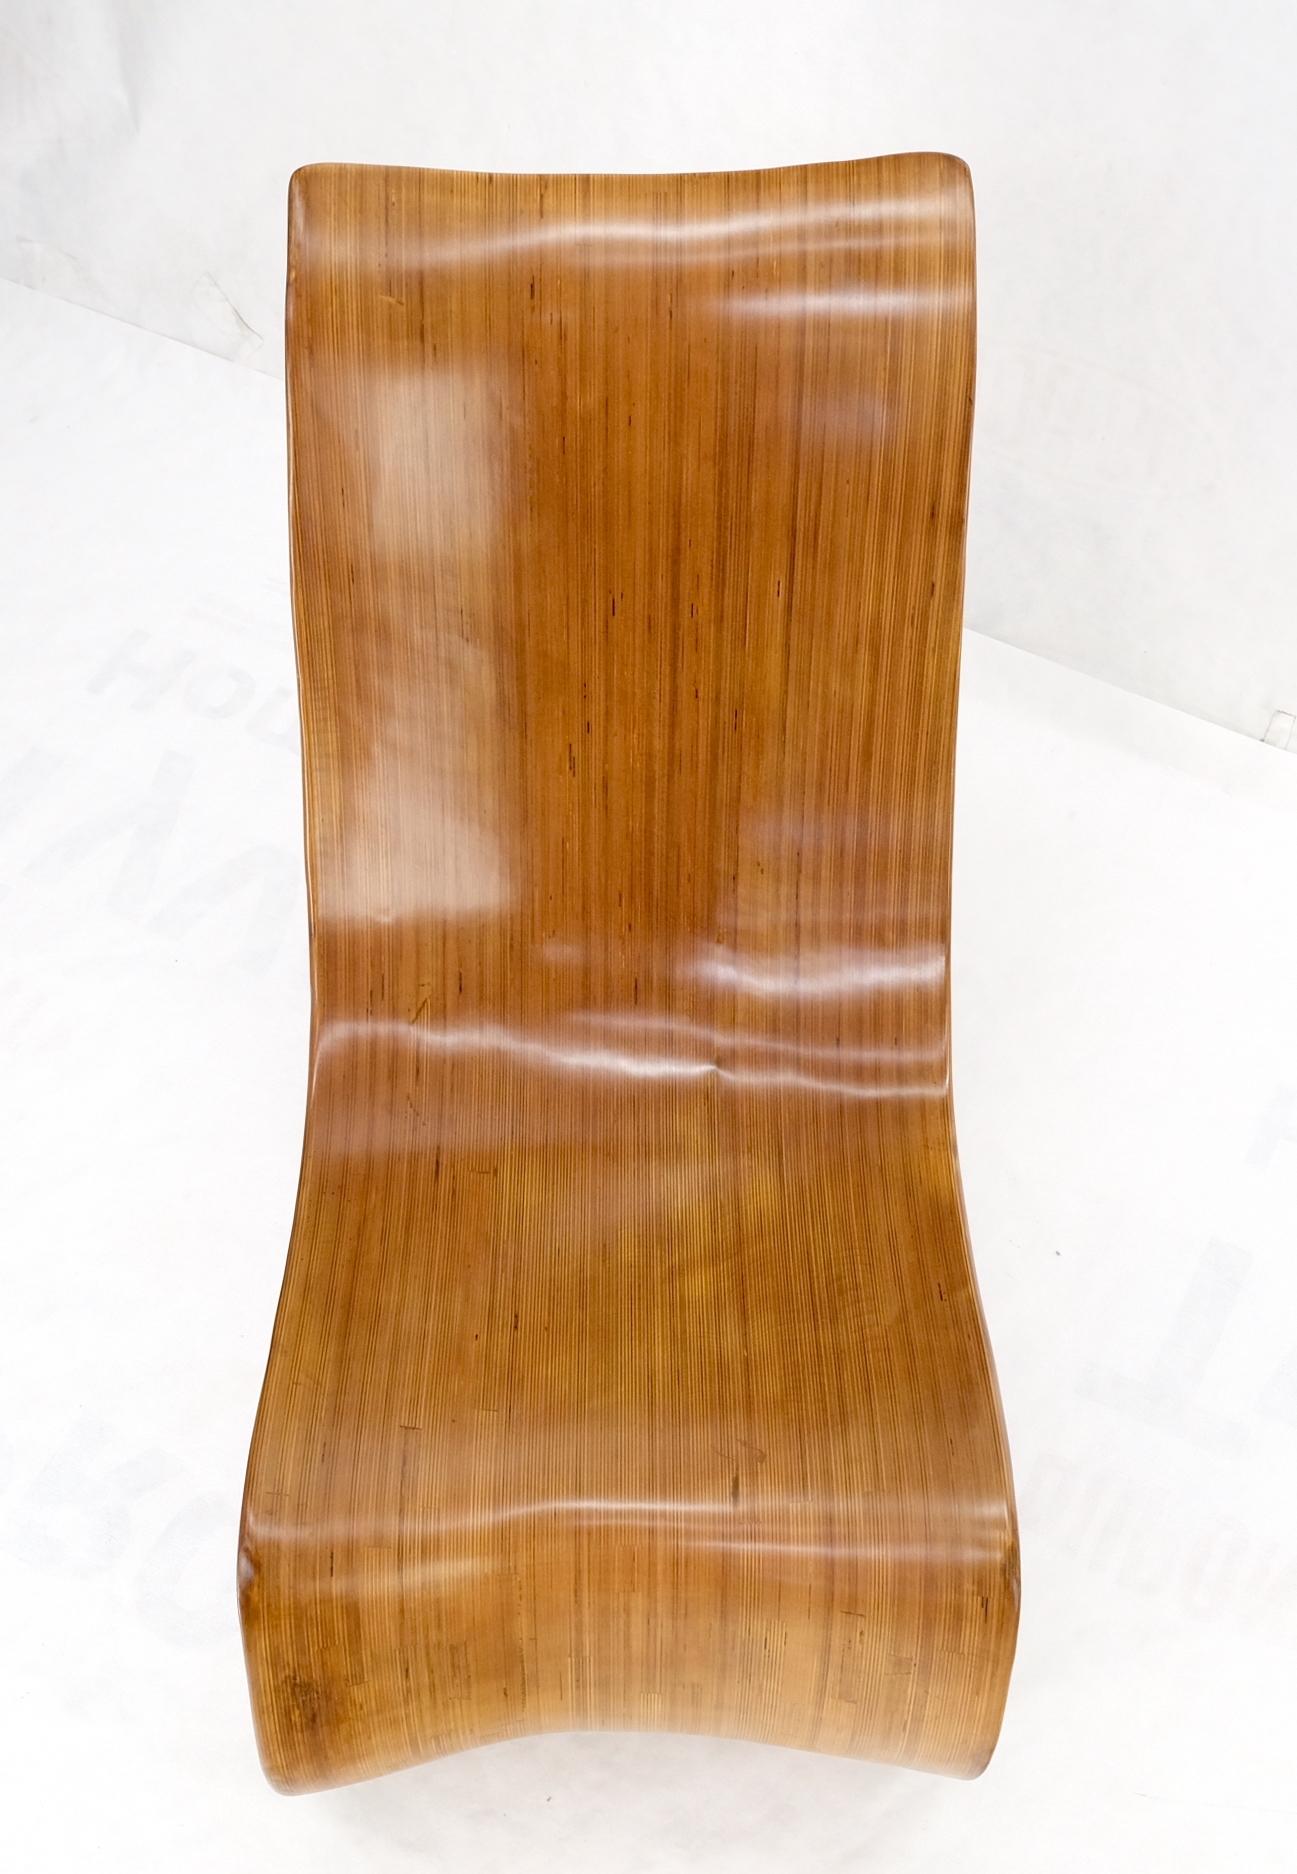 Unusual Cradle Shape Seat One Piece of S Curve Molded Wood Rocking Chair Mint 4